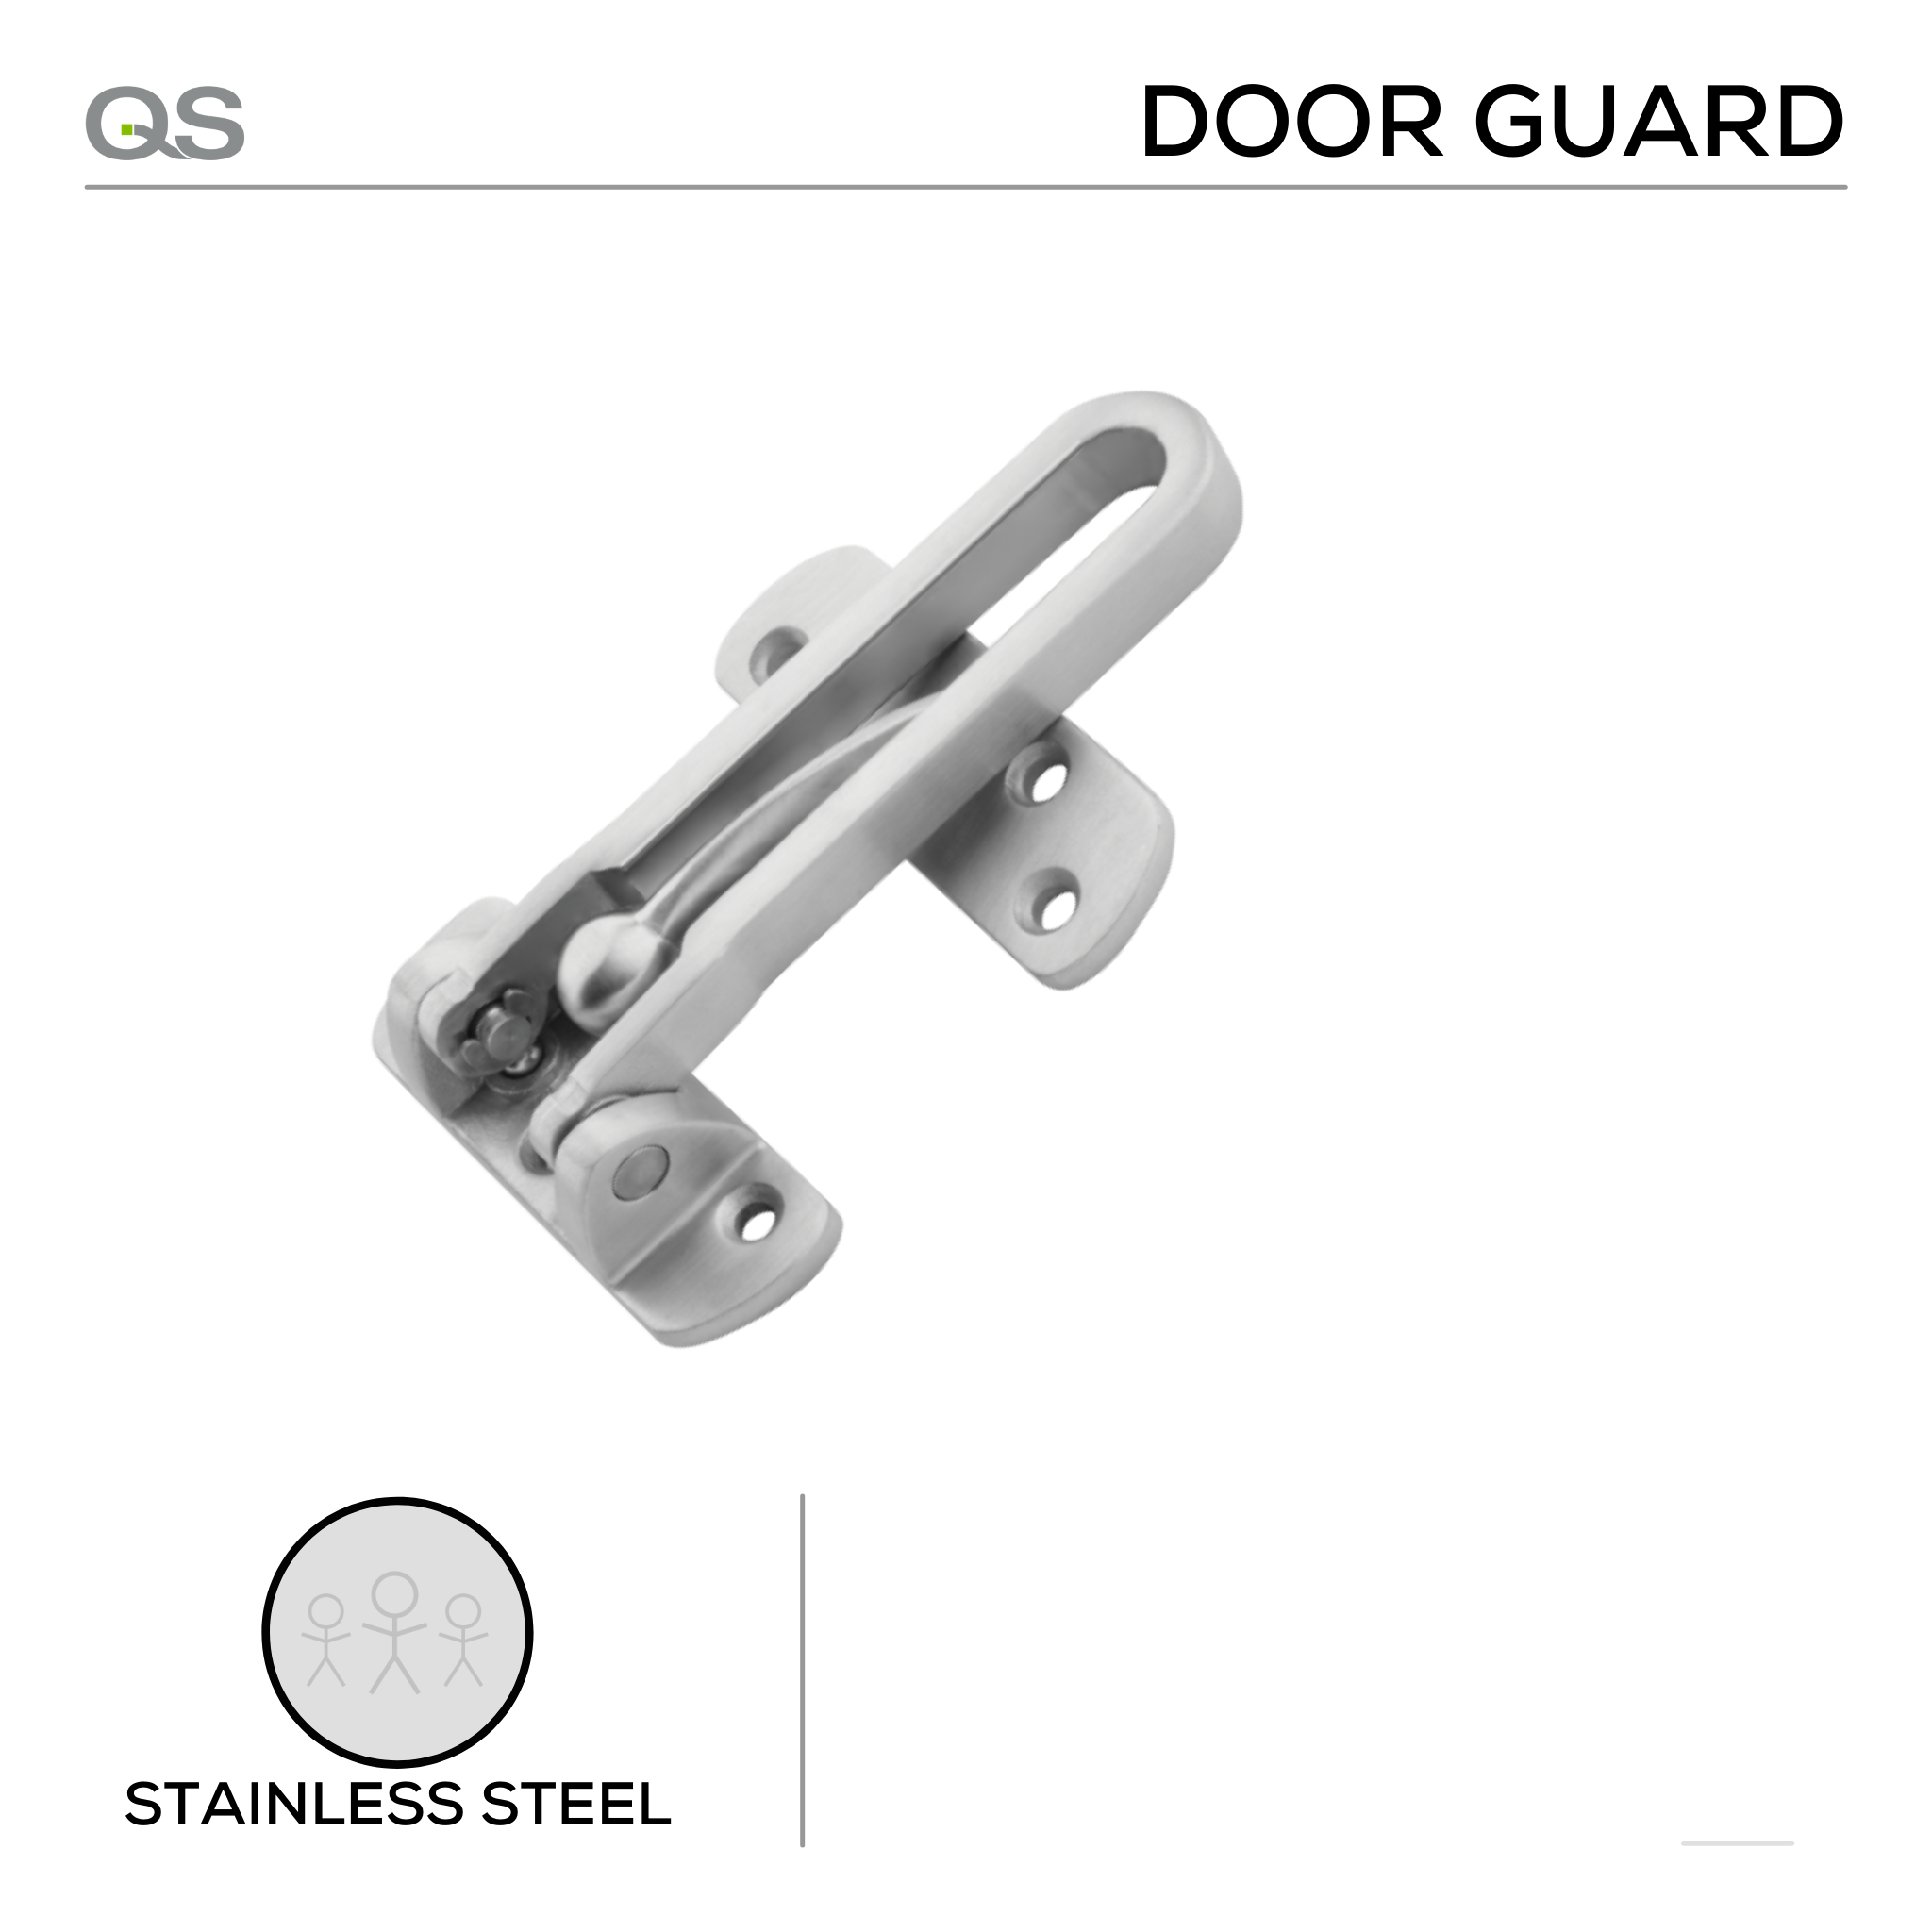 QS4430, Door Guard, Security, 106mm (l) x mm (Ø) x 60mm (w), 180º View, Stainless Steel, QS